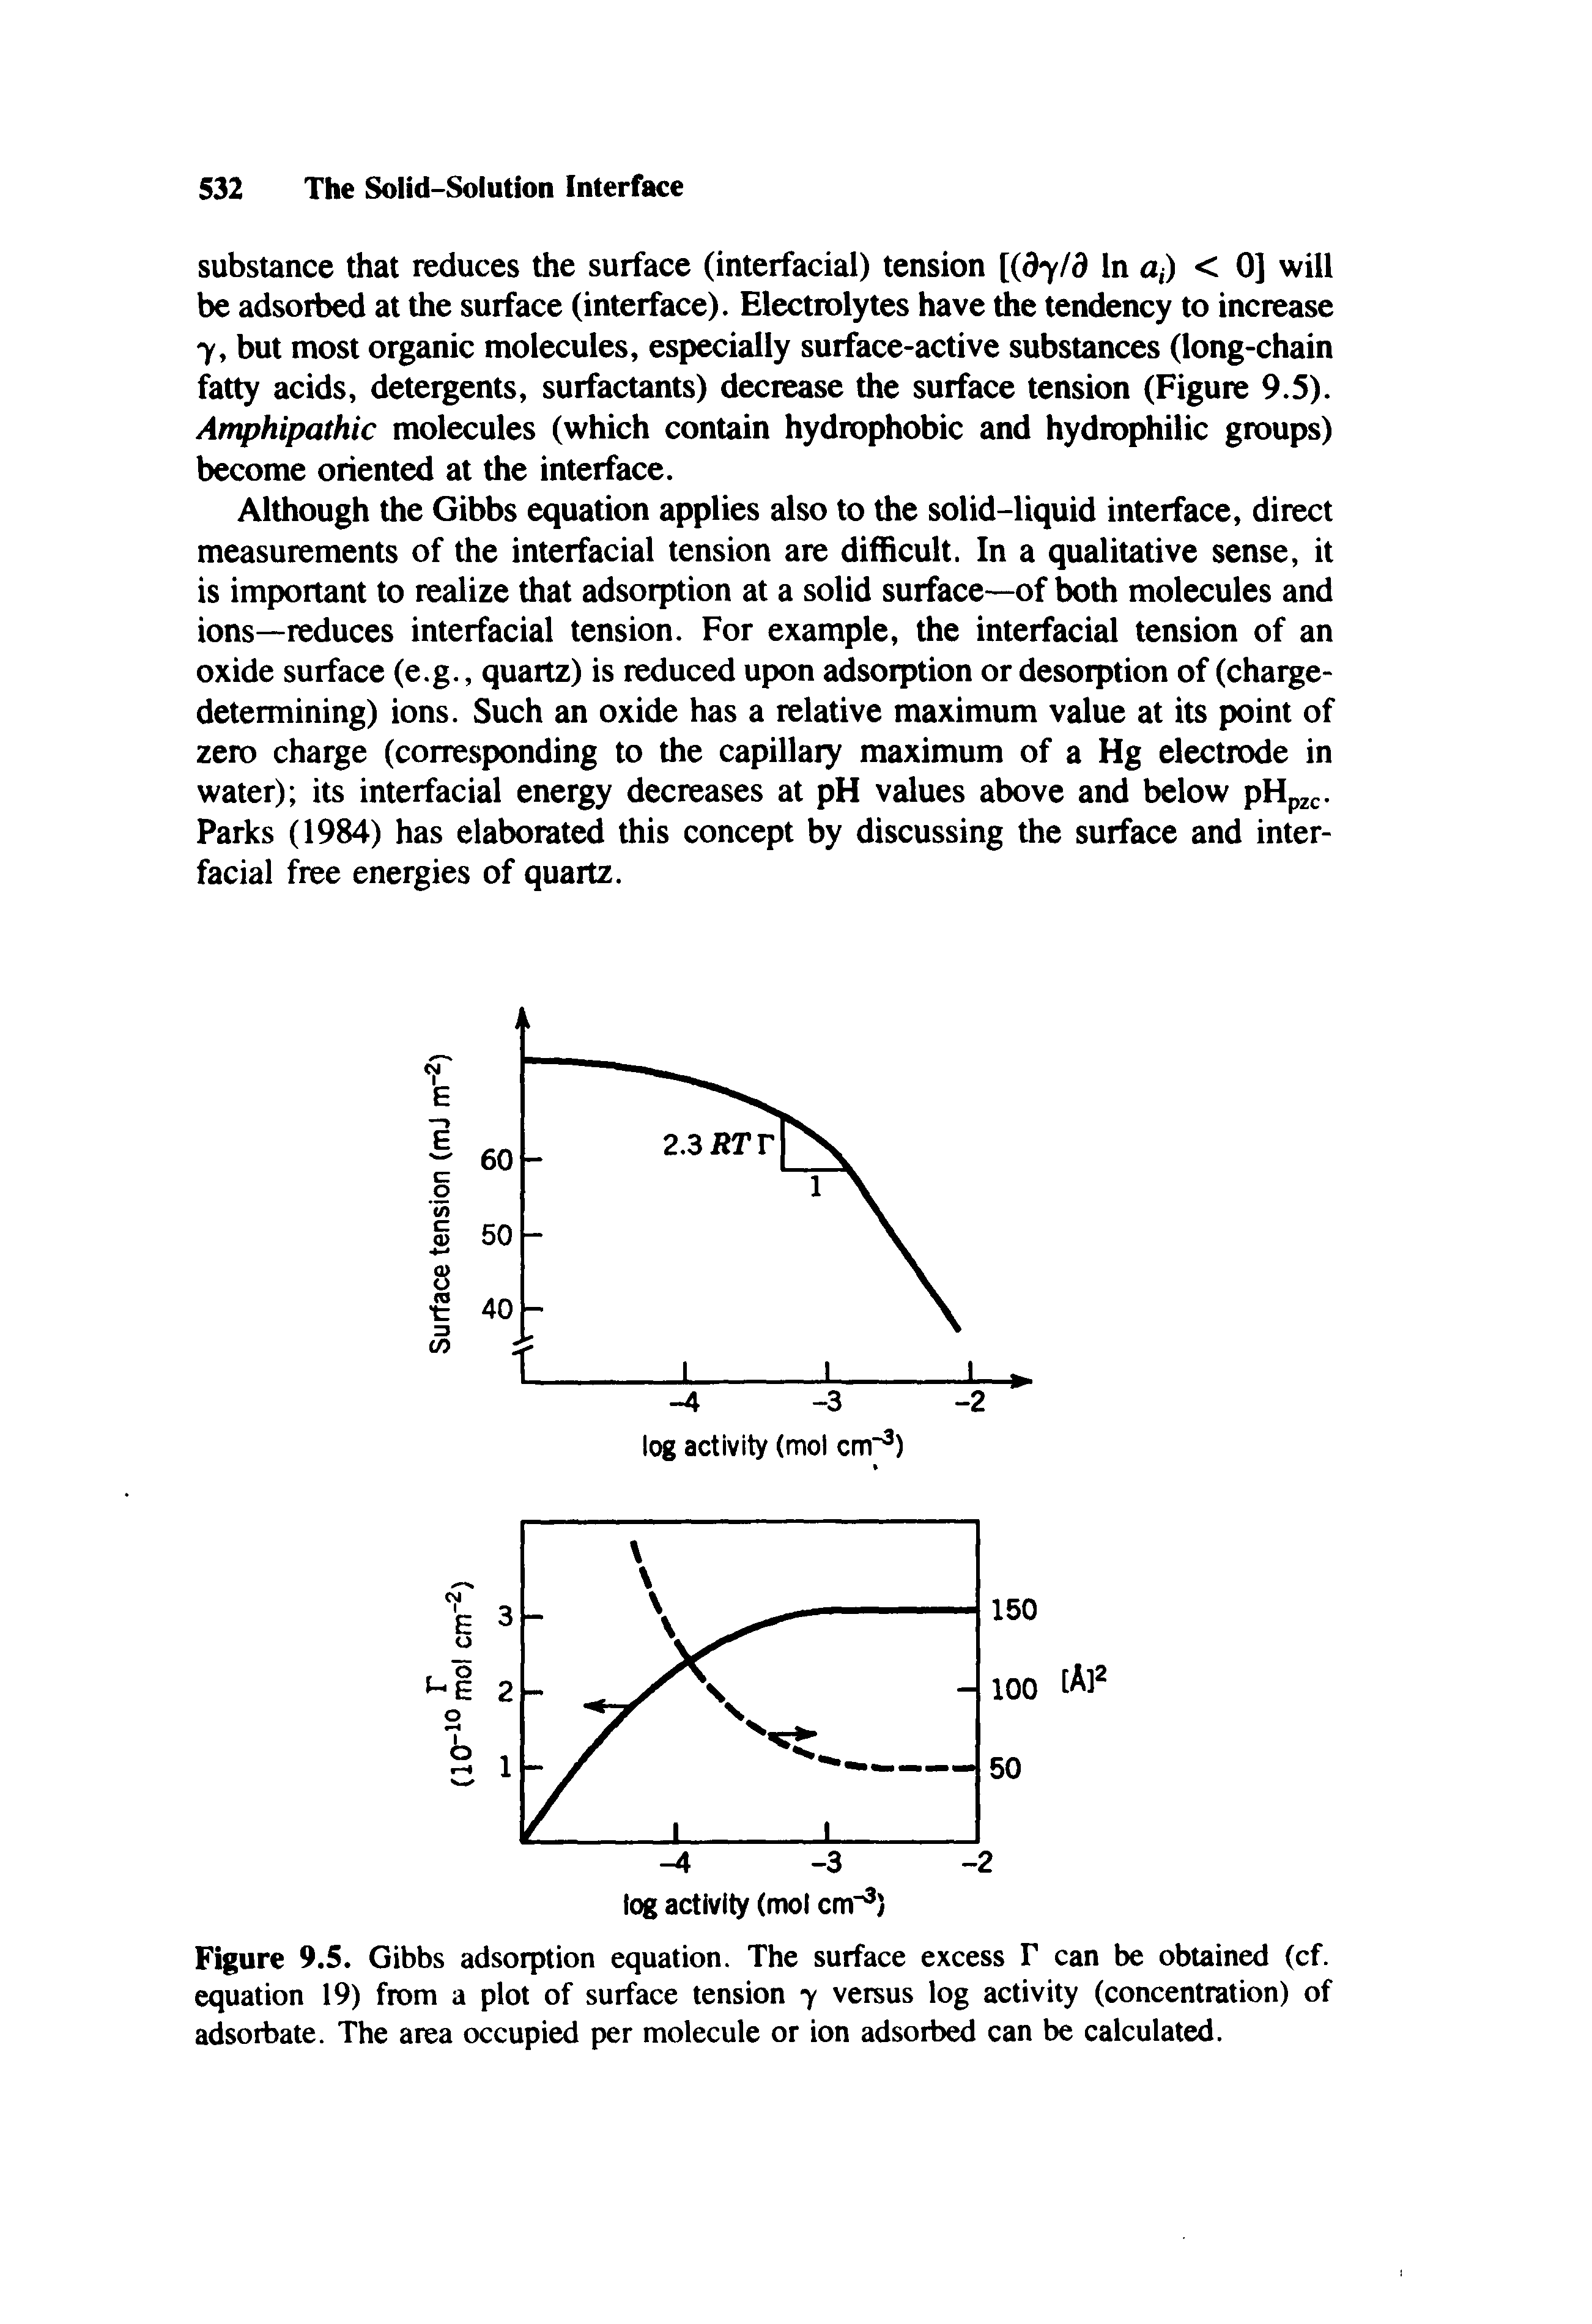 Figure 9.5. Gibbs adsorption equation. The surface excess F can be obtained (cf. equation 19) from a plot of surface tension 7 versus log activity (concentration) of adsorbate. The area occupied per molecule or ion adsorbed can be calculated.